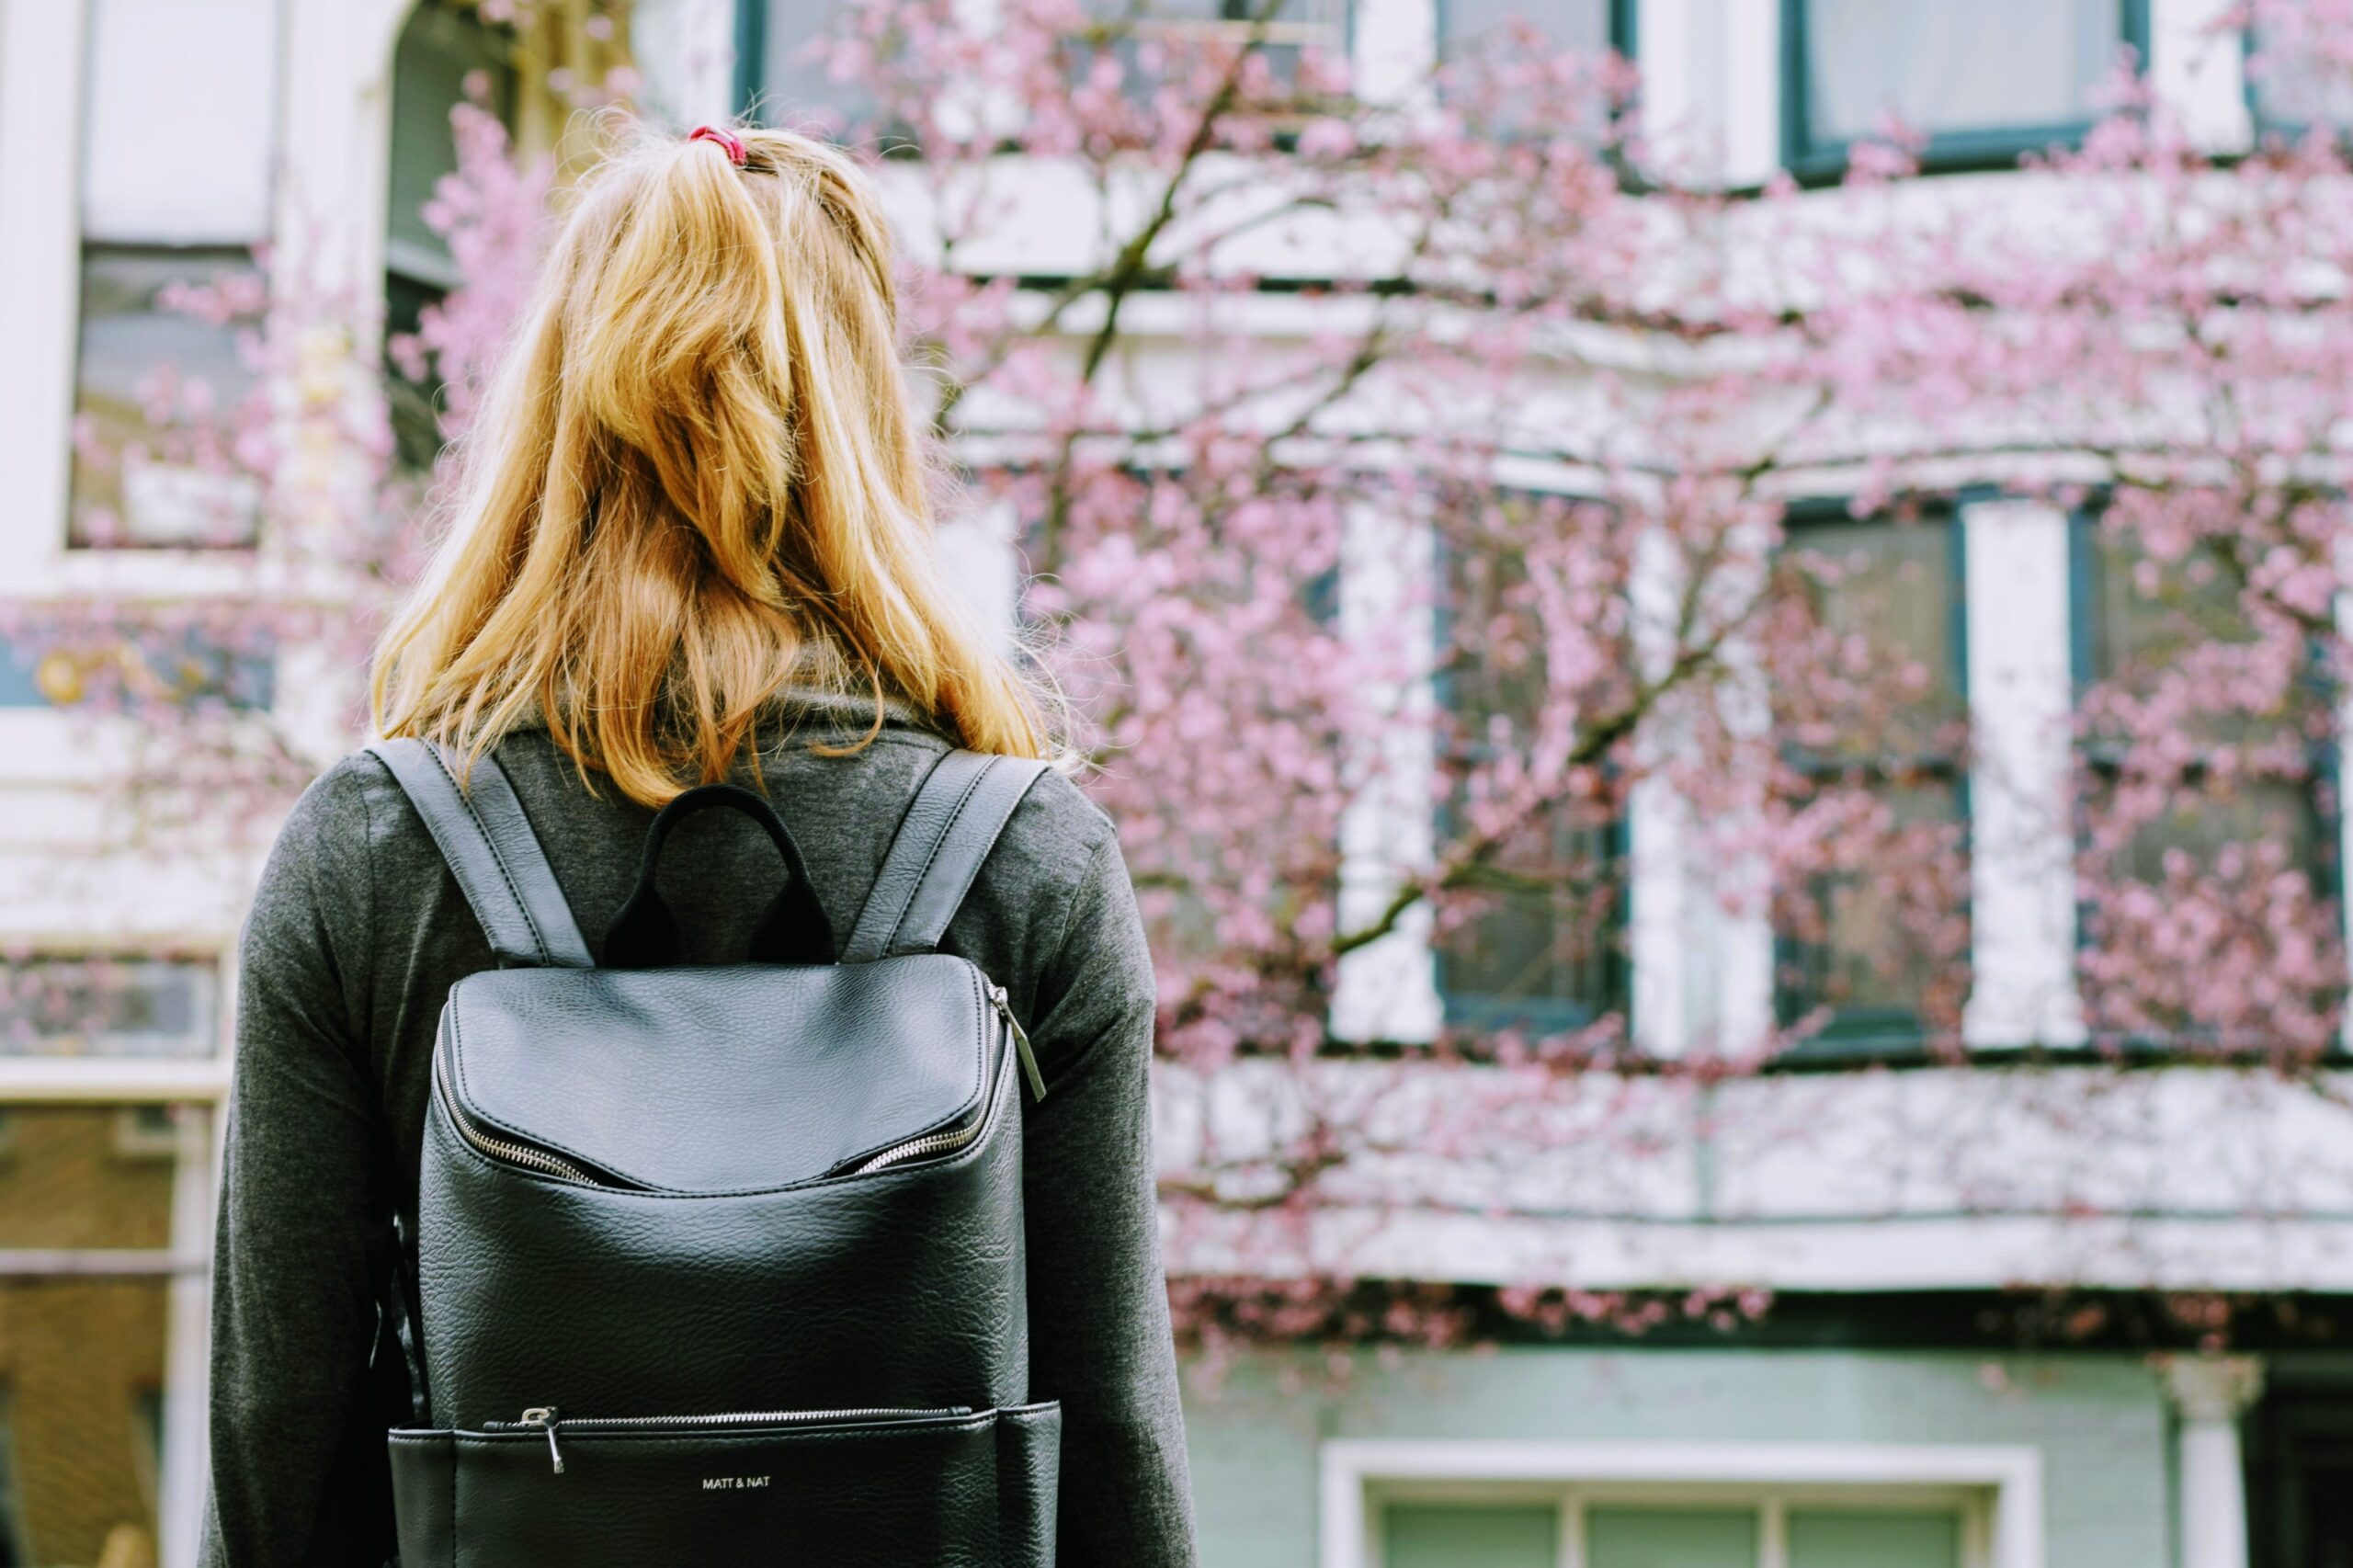 A student with shoulder length blonde hair wearing a backpack looks at a college building.